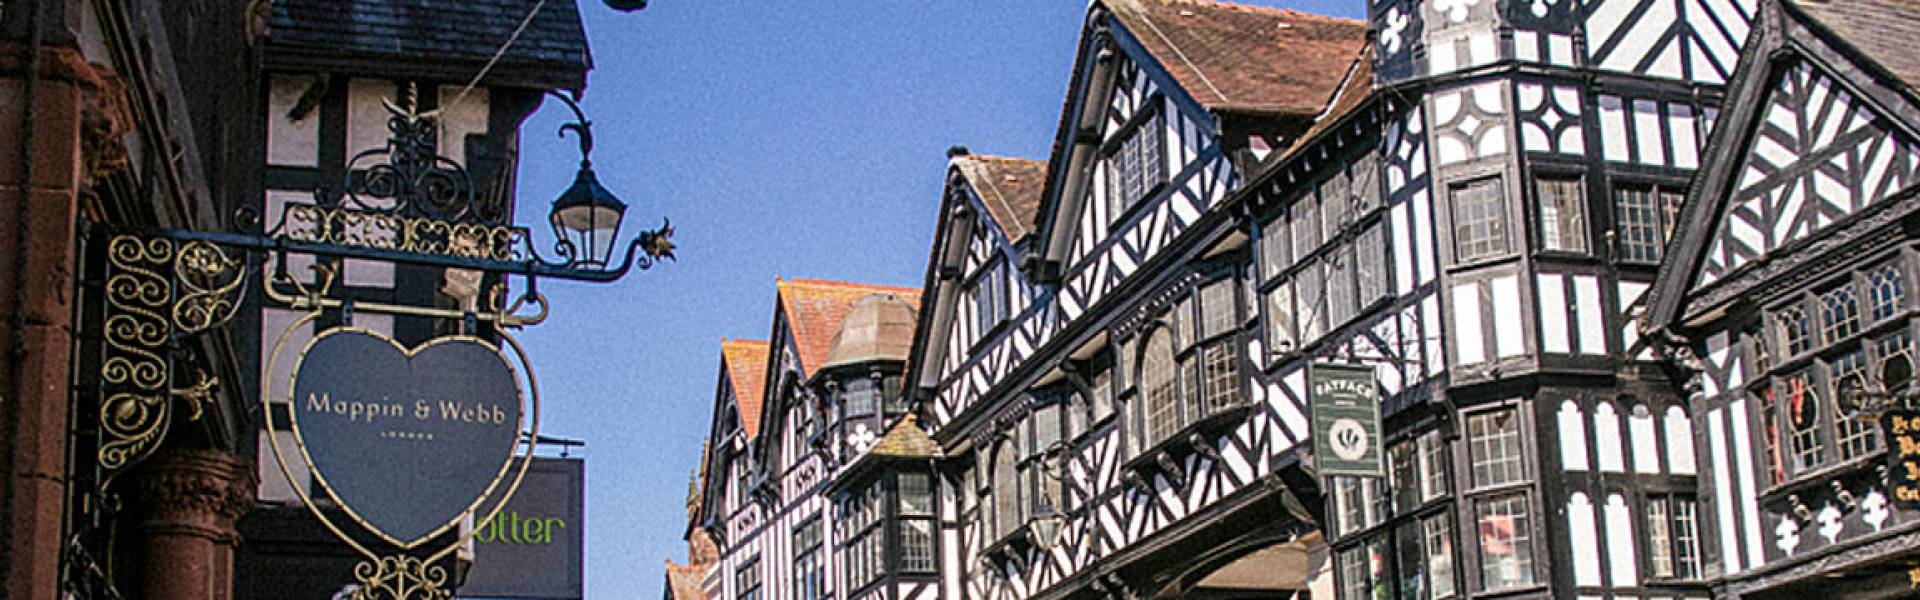 Historic Chester Rows, timber-frame houses and shops in the City of Chester